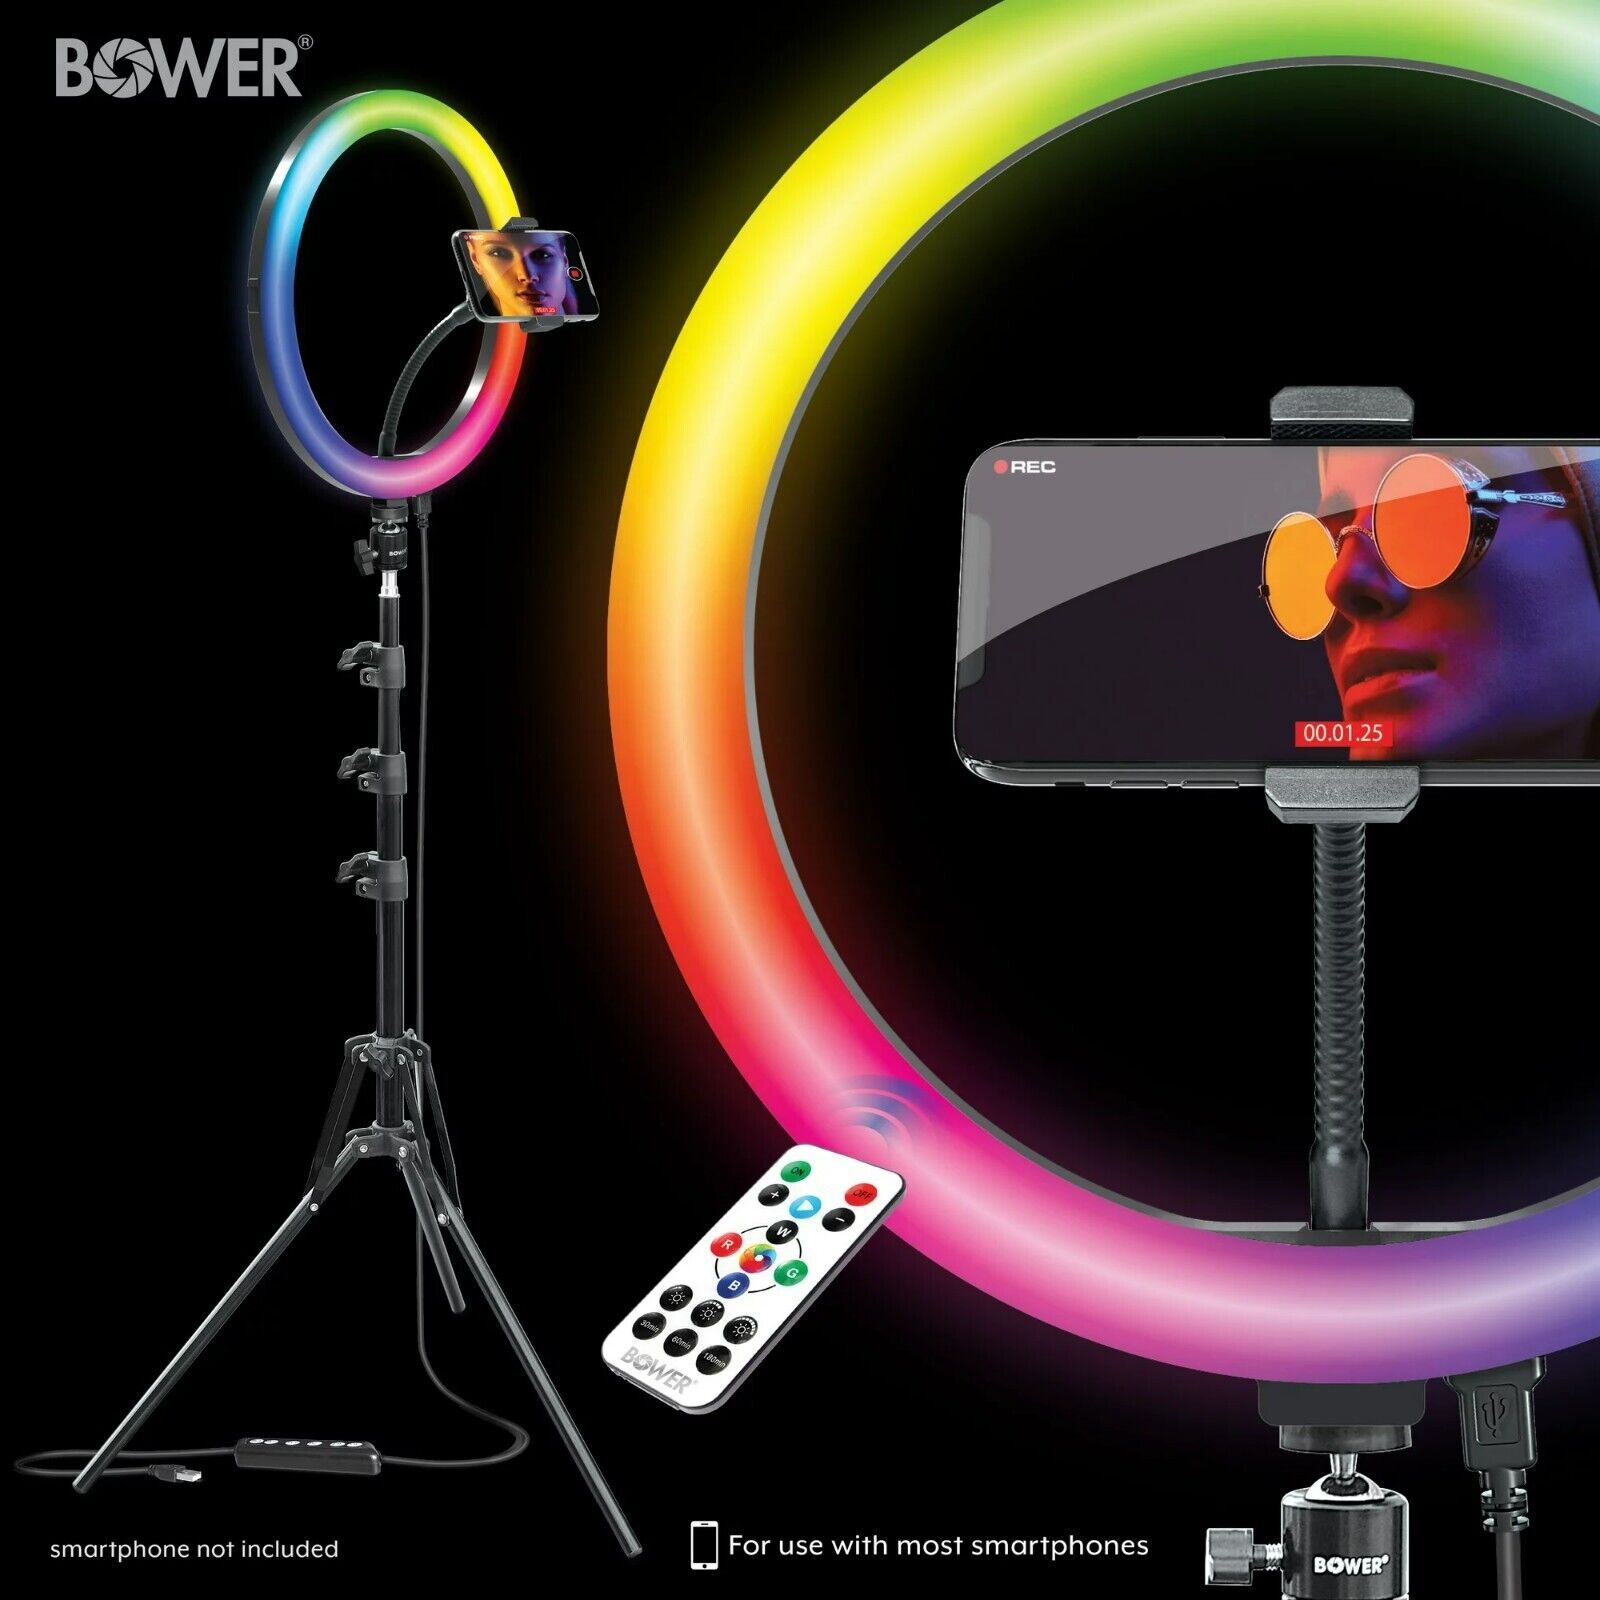 Bower 12-inch LED White & RGB Ring Light Studio Kit w/ Special Effects & Tripod